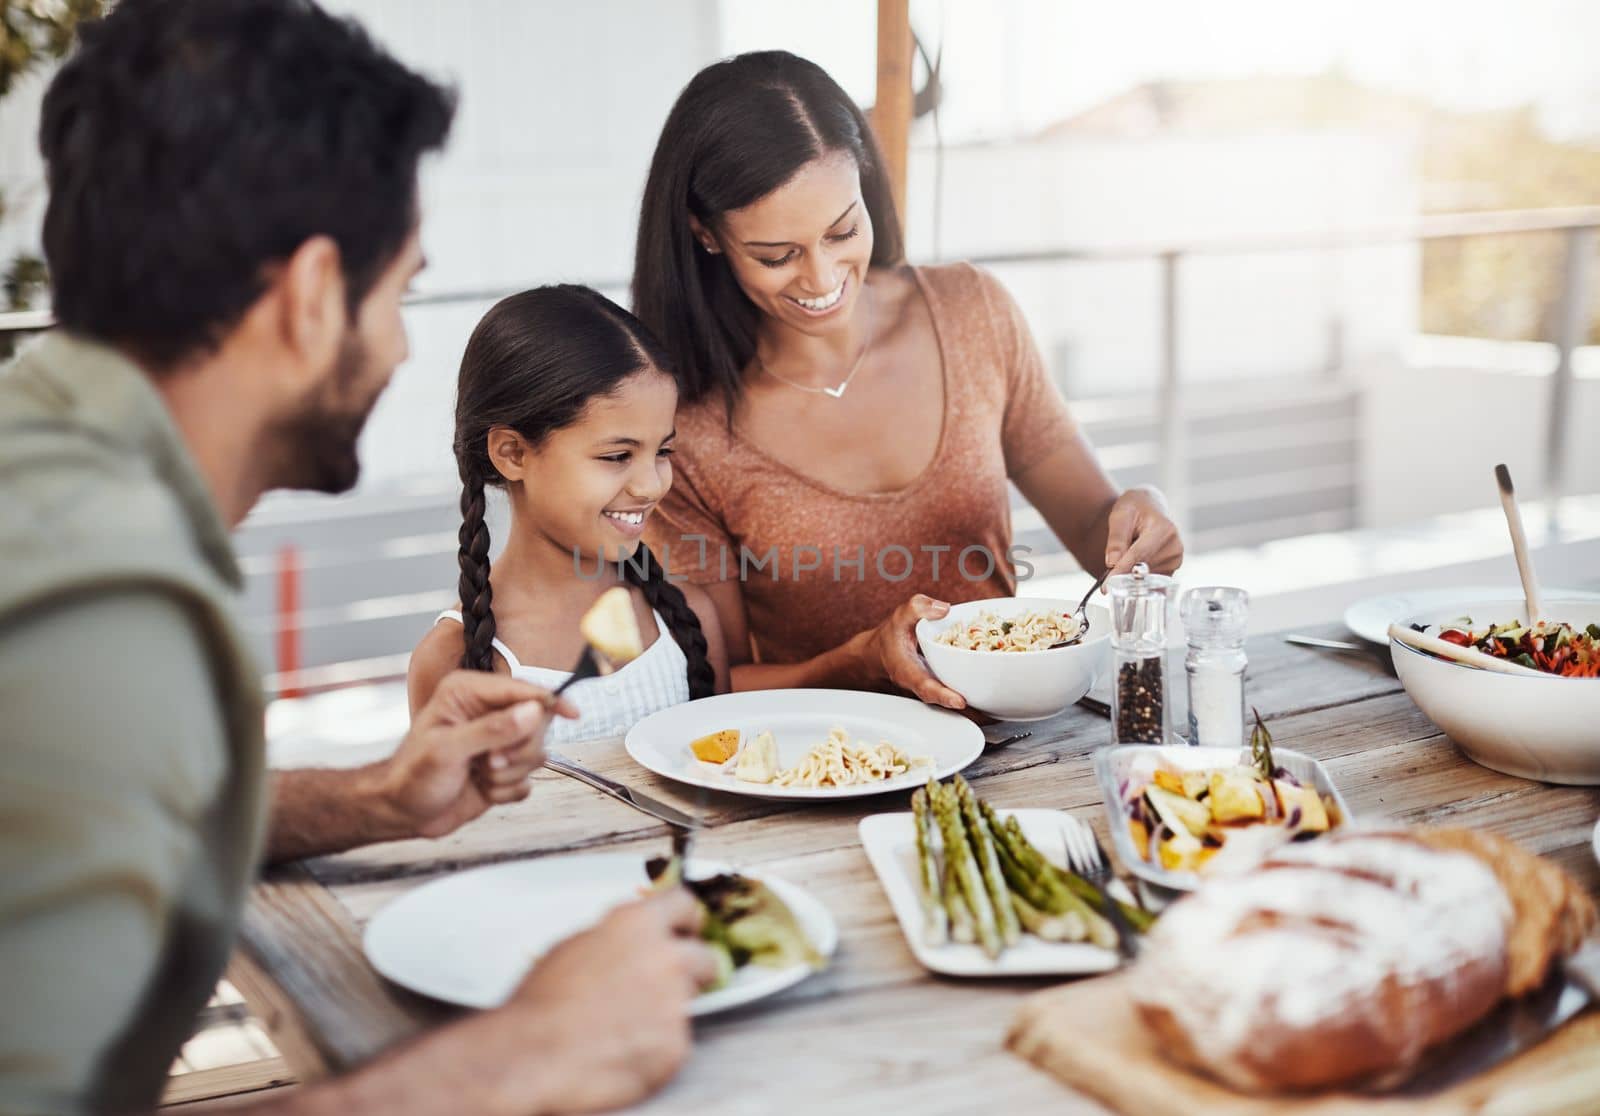 Making meal time, family time. a happy young family enjoying a meal together outdoors